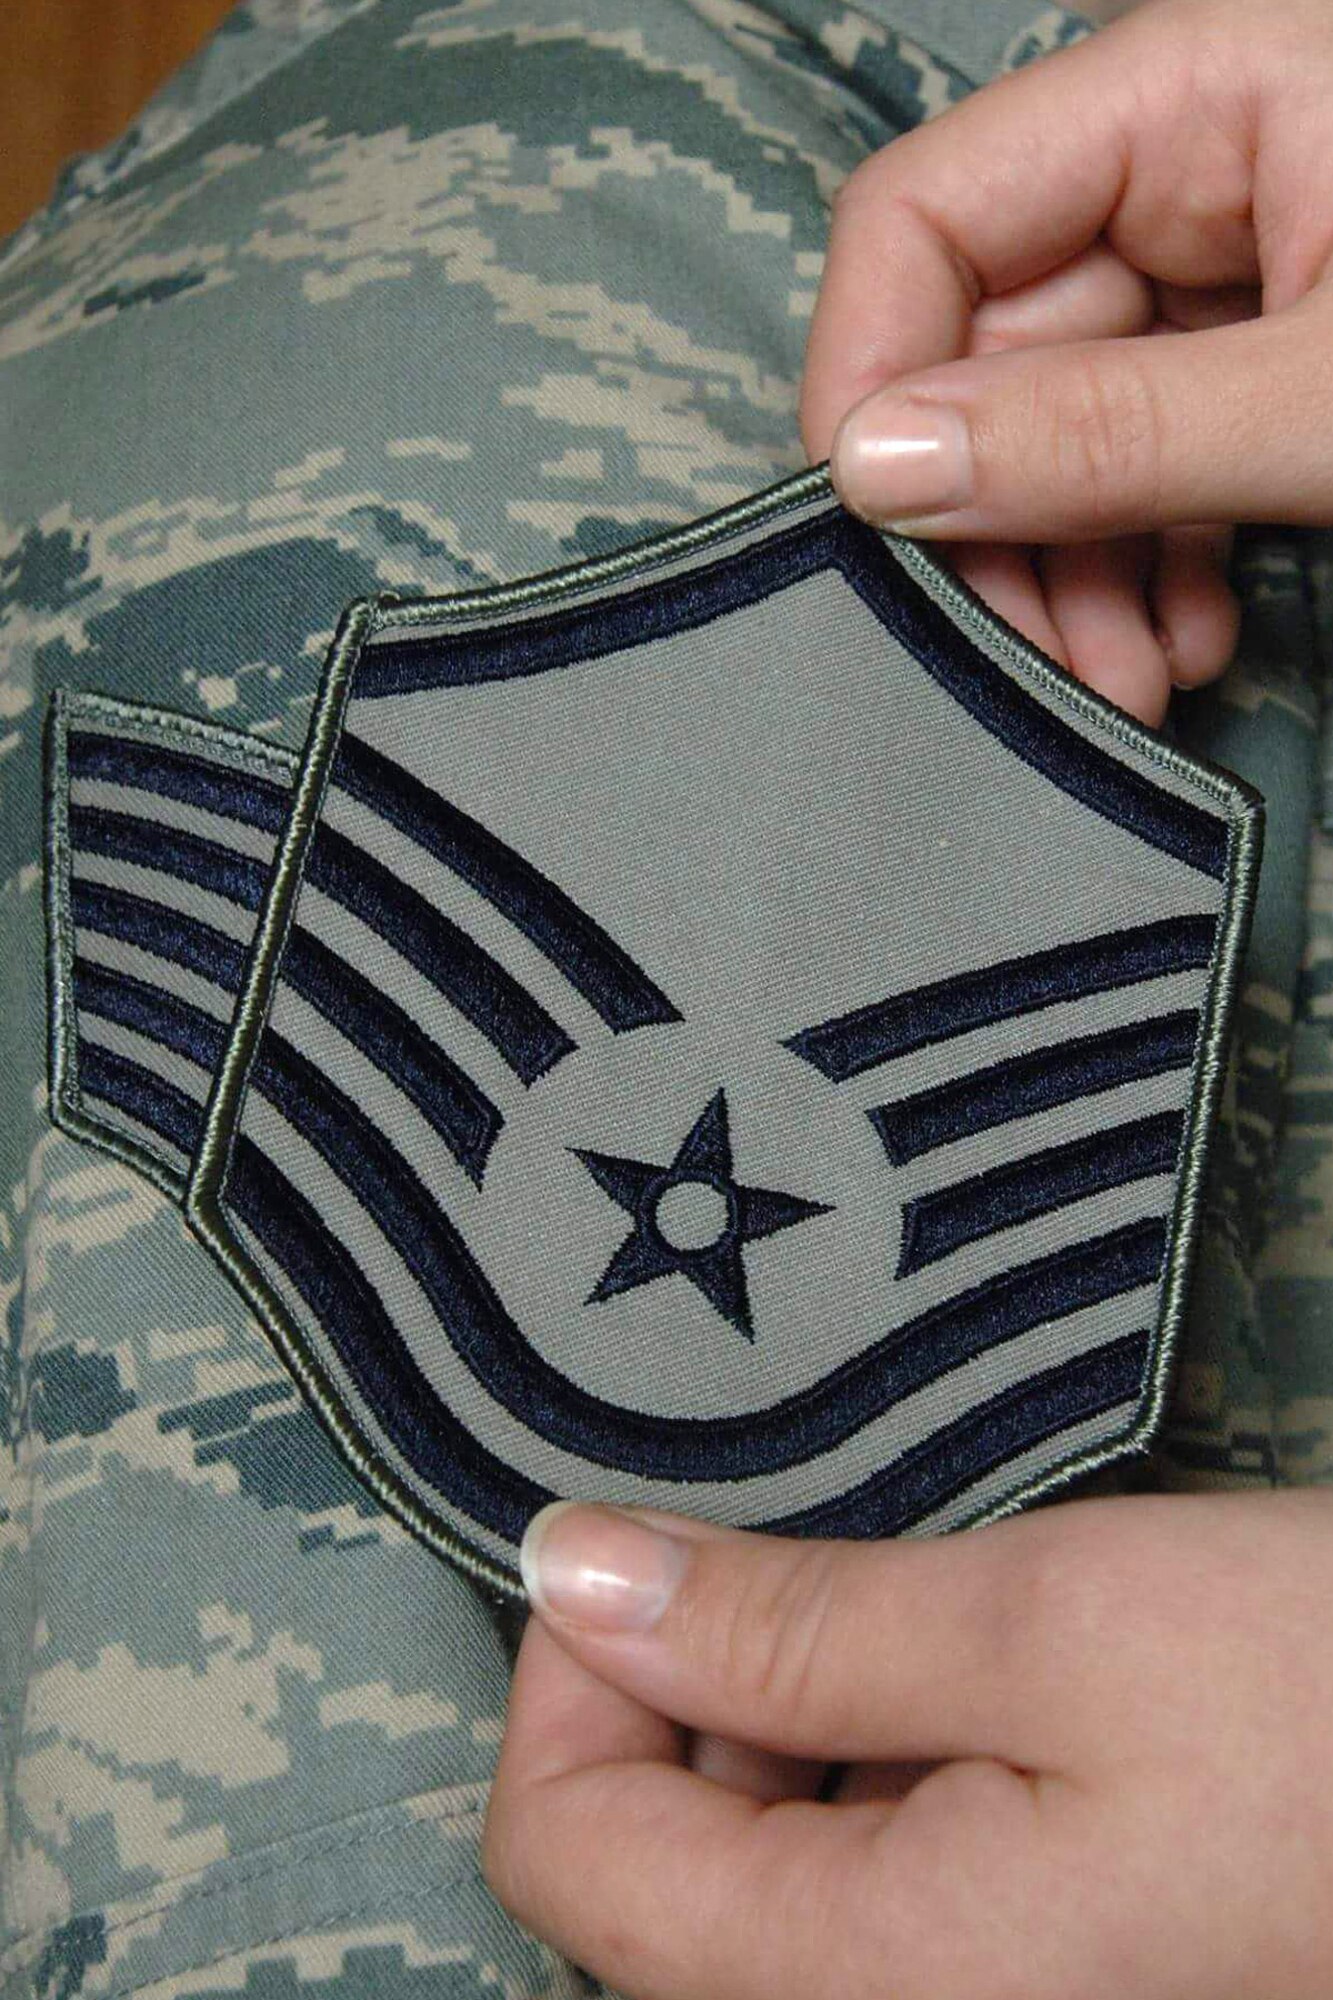 Air Force officials released the names of technical sergeants selected for promotion to master sergeant July 16, including 17 Airmen at Hanscom. Officials selected 4,649 technical sergeants out of 22,286 eligible for a selection rate of 20.86% this promotion cycle. (U.S. Air Force photo)